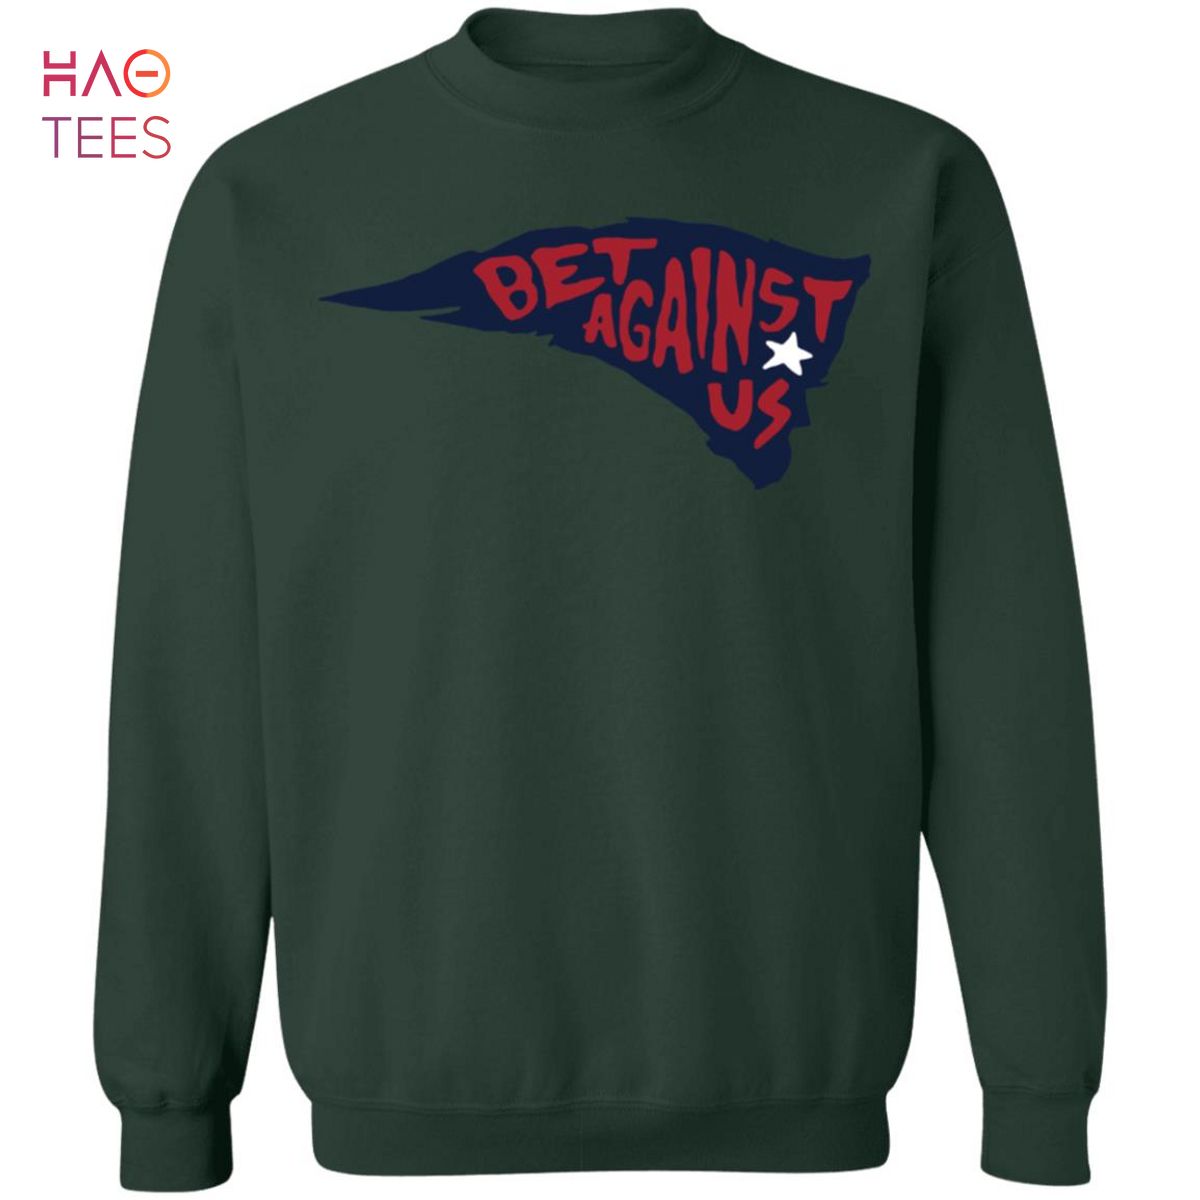 [NEW] Patriots Bet Against Us Sweater